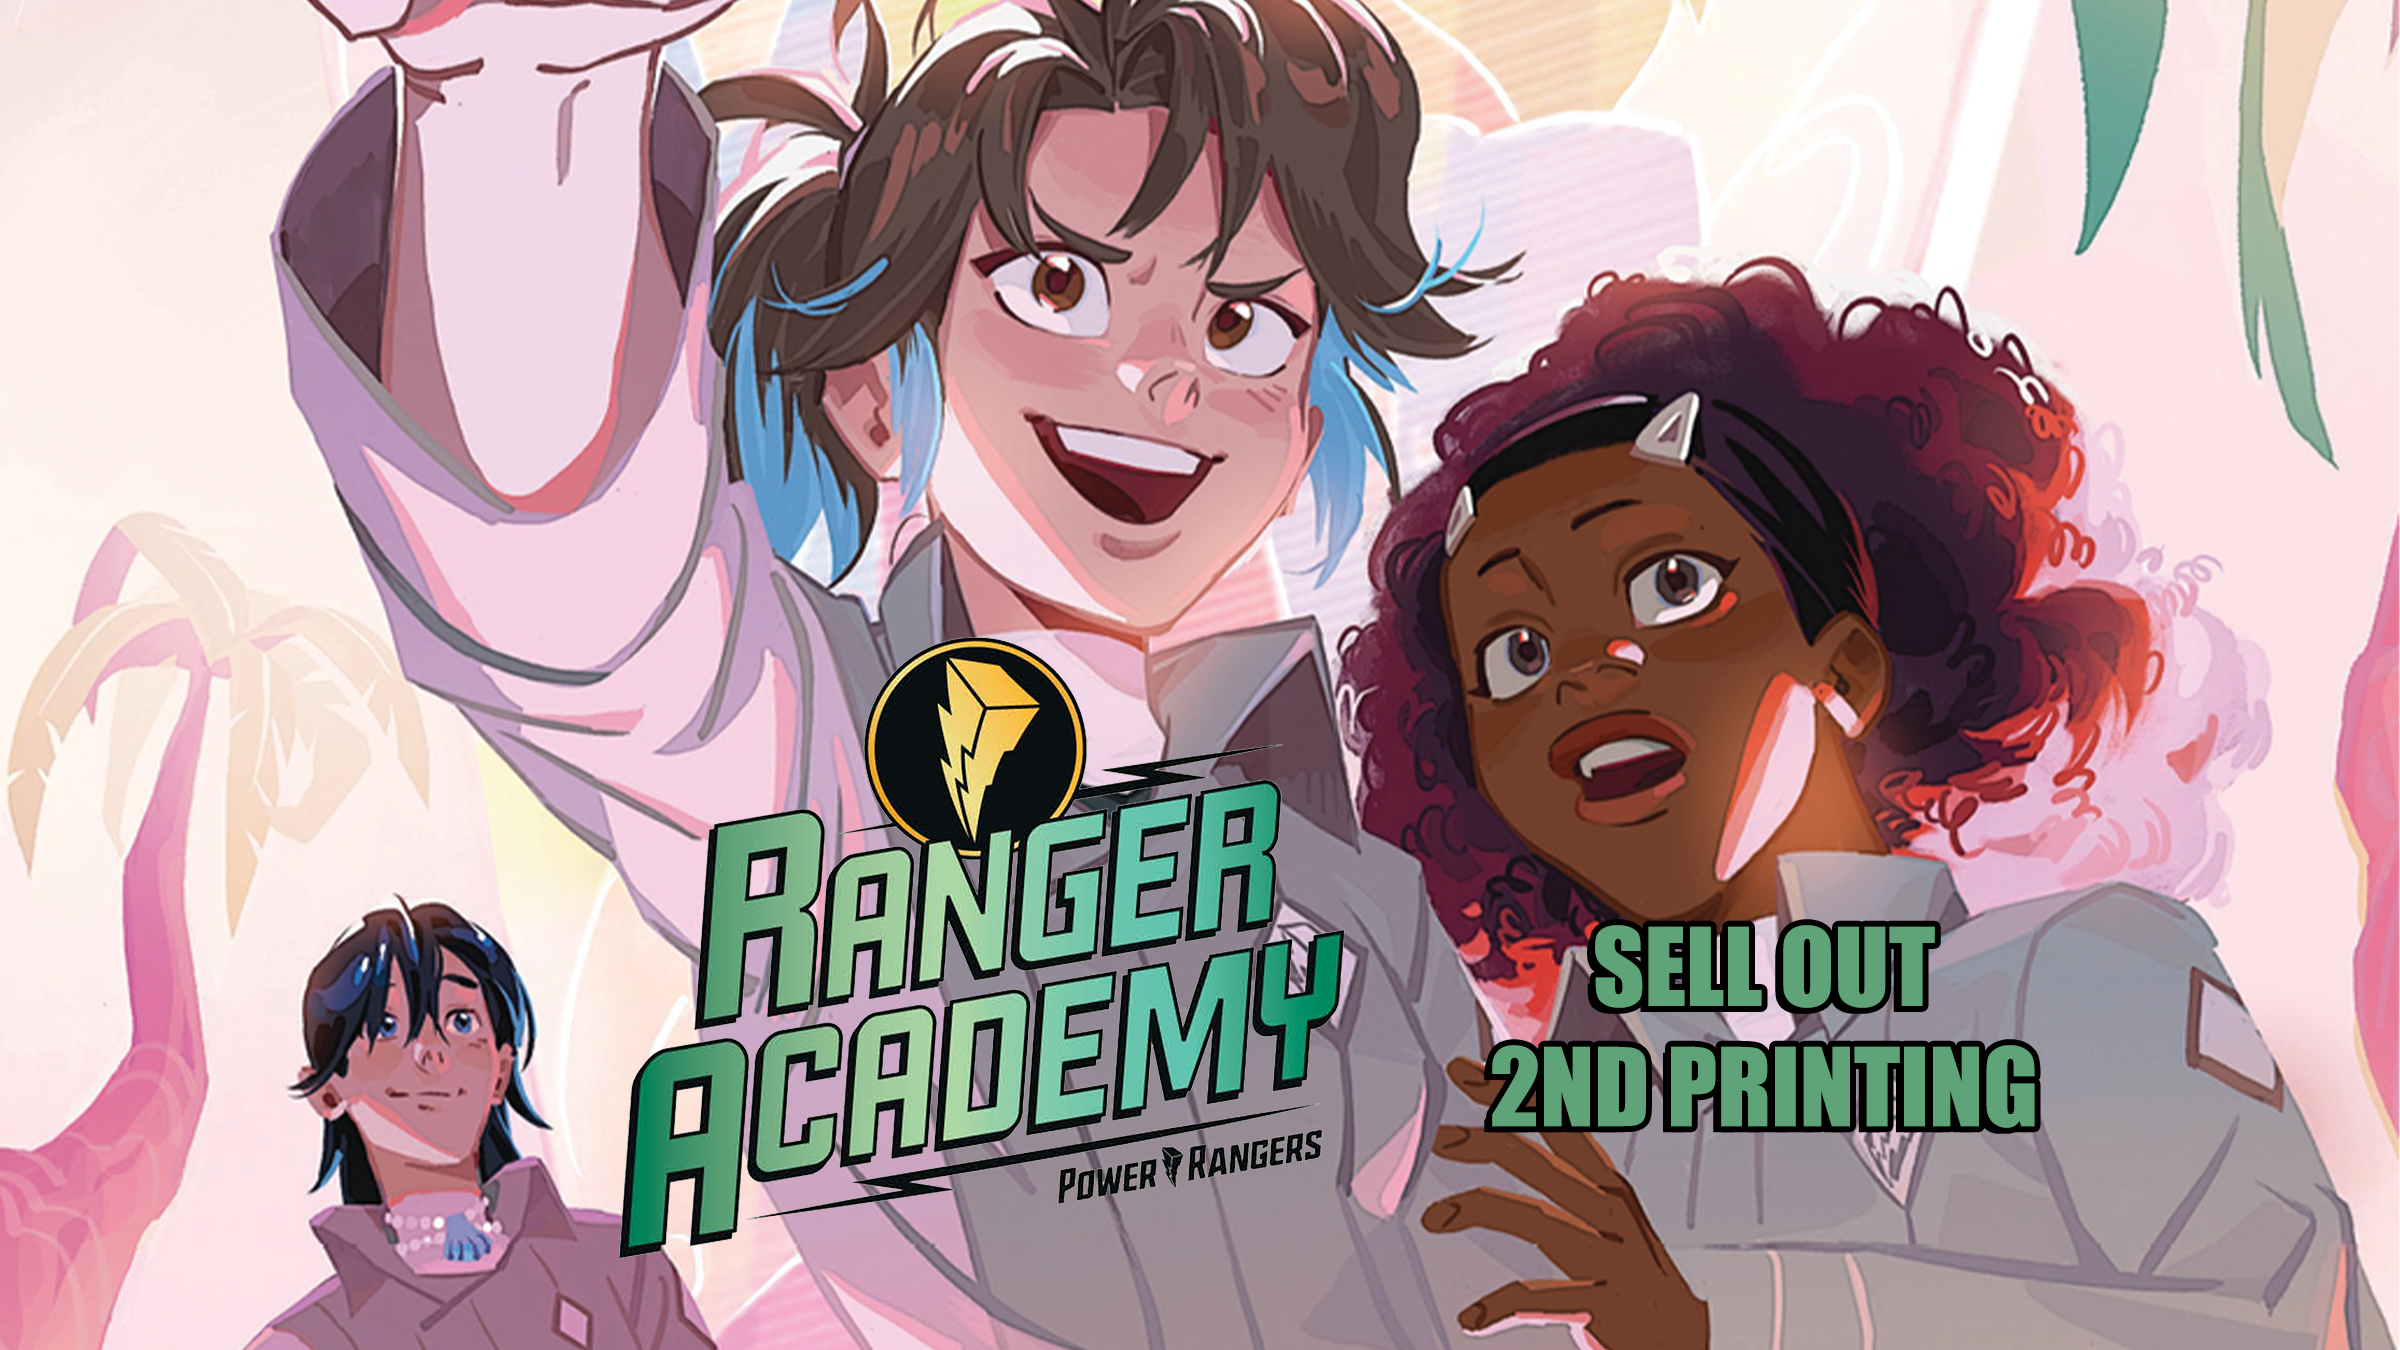 Ranger Academy #1 Sells Out and Returns With Impressive Second Printing